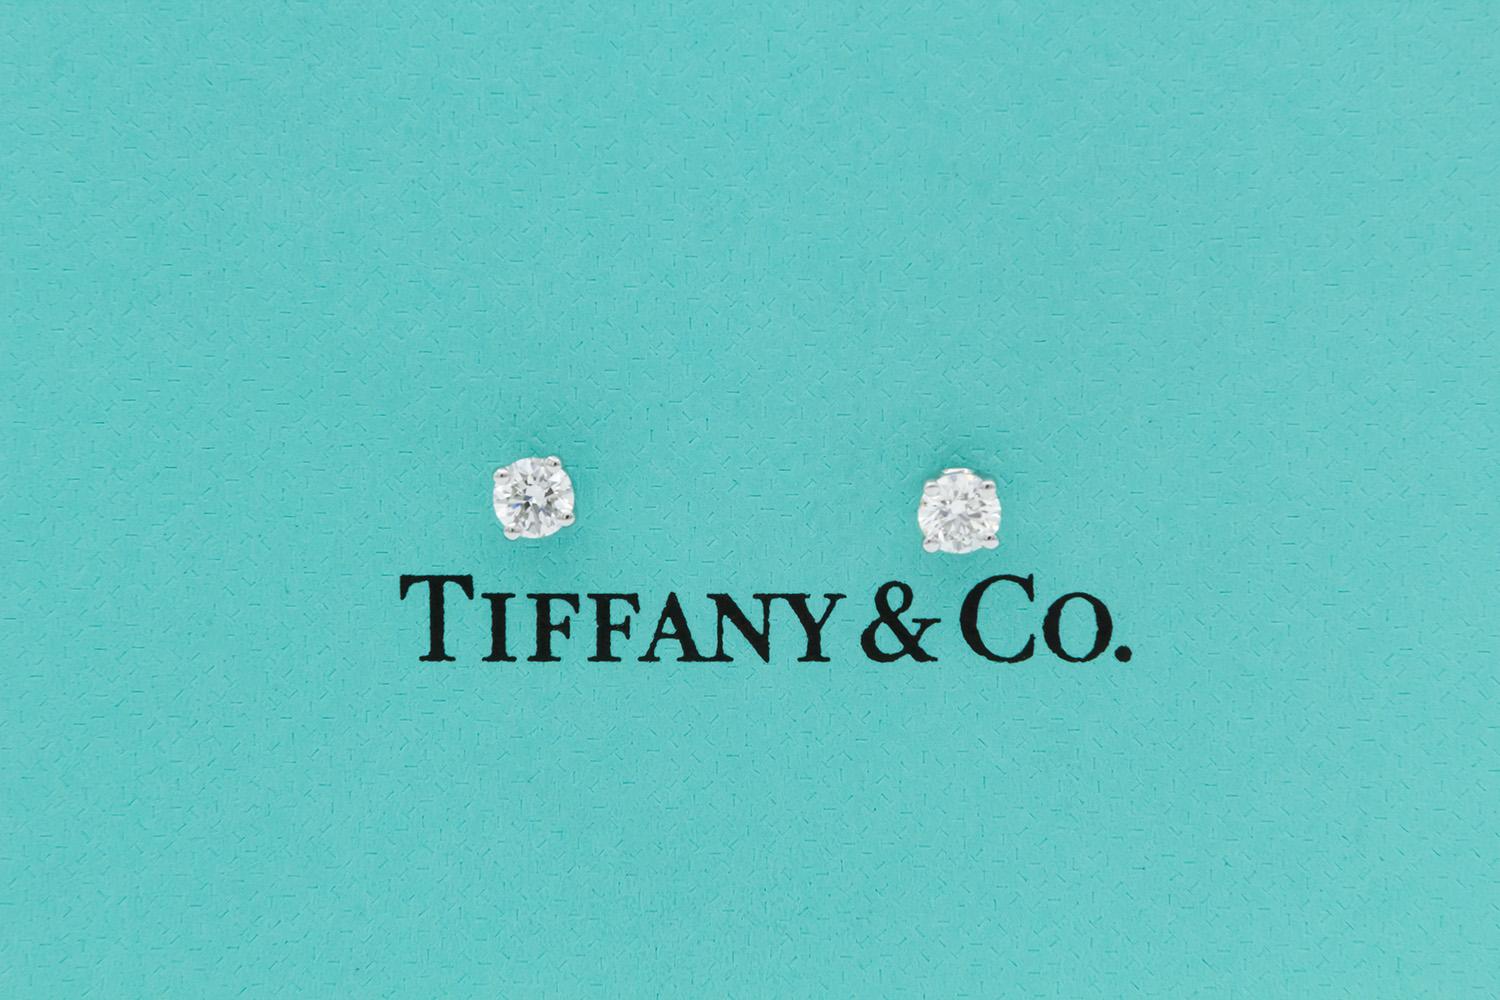 We are pleased to present these Tiffany & Co. Platinum & Round Brilliant Cut Diamond Stud Earrings. These beautiful earrings feature an estimated 0.35ctw F/VS Tiffany & Co. Round Brilliant Cut Diamonds set in platinum 4 prong studs with screw back